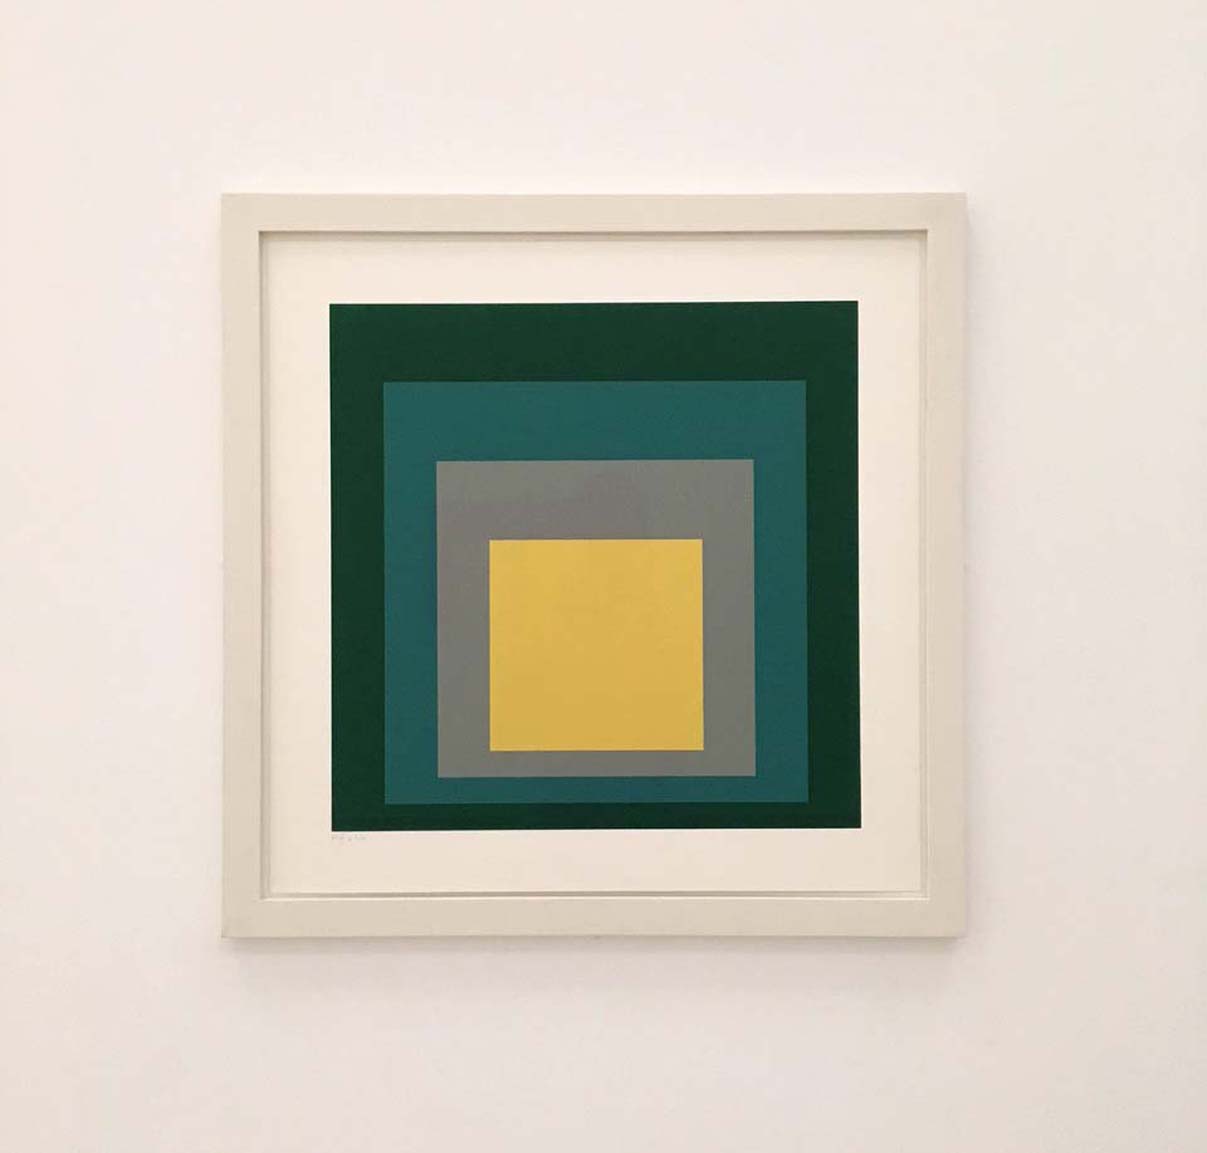  Joseph Albers, Homage to a Square 